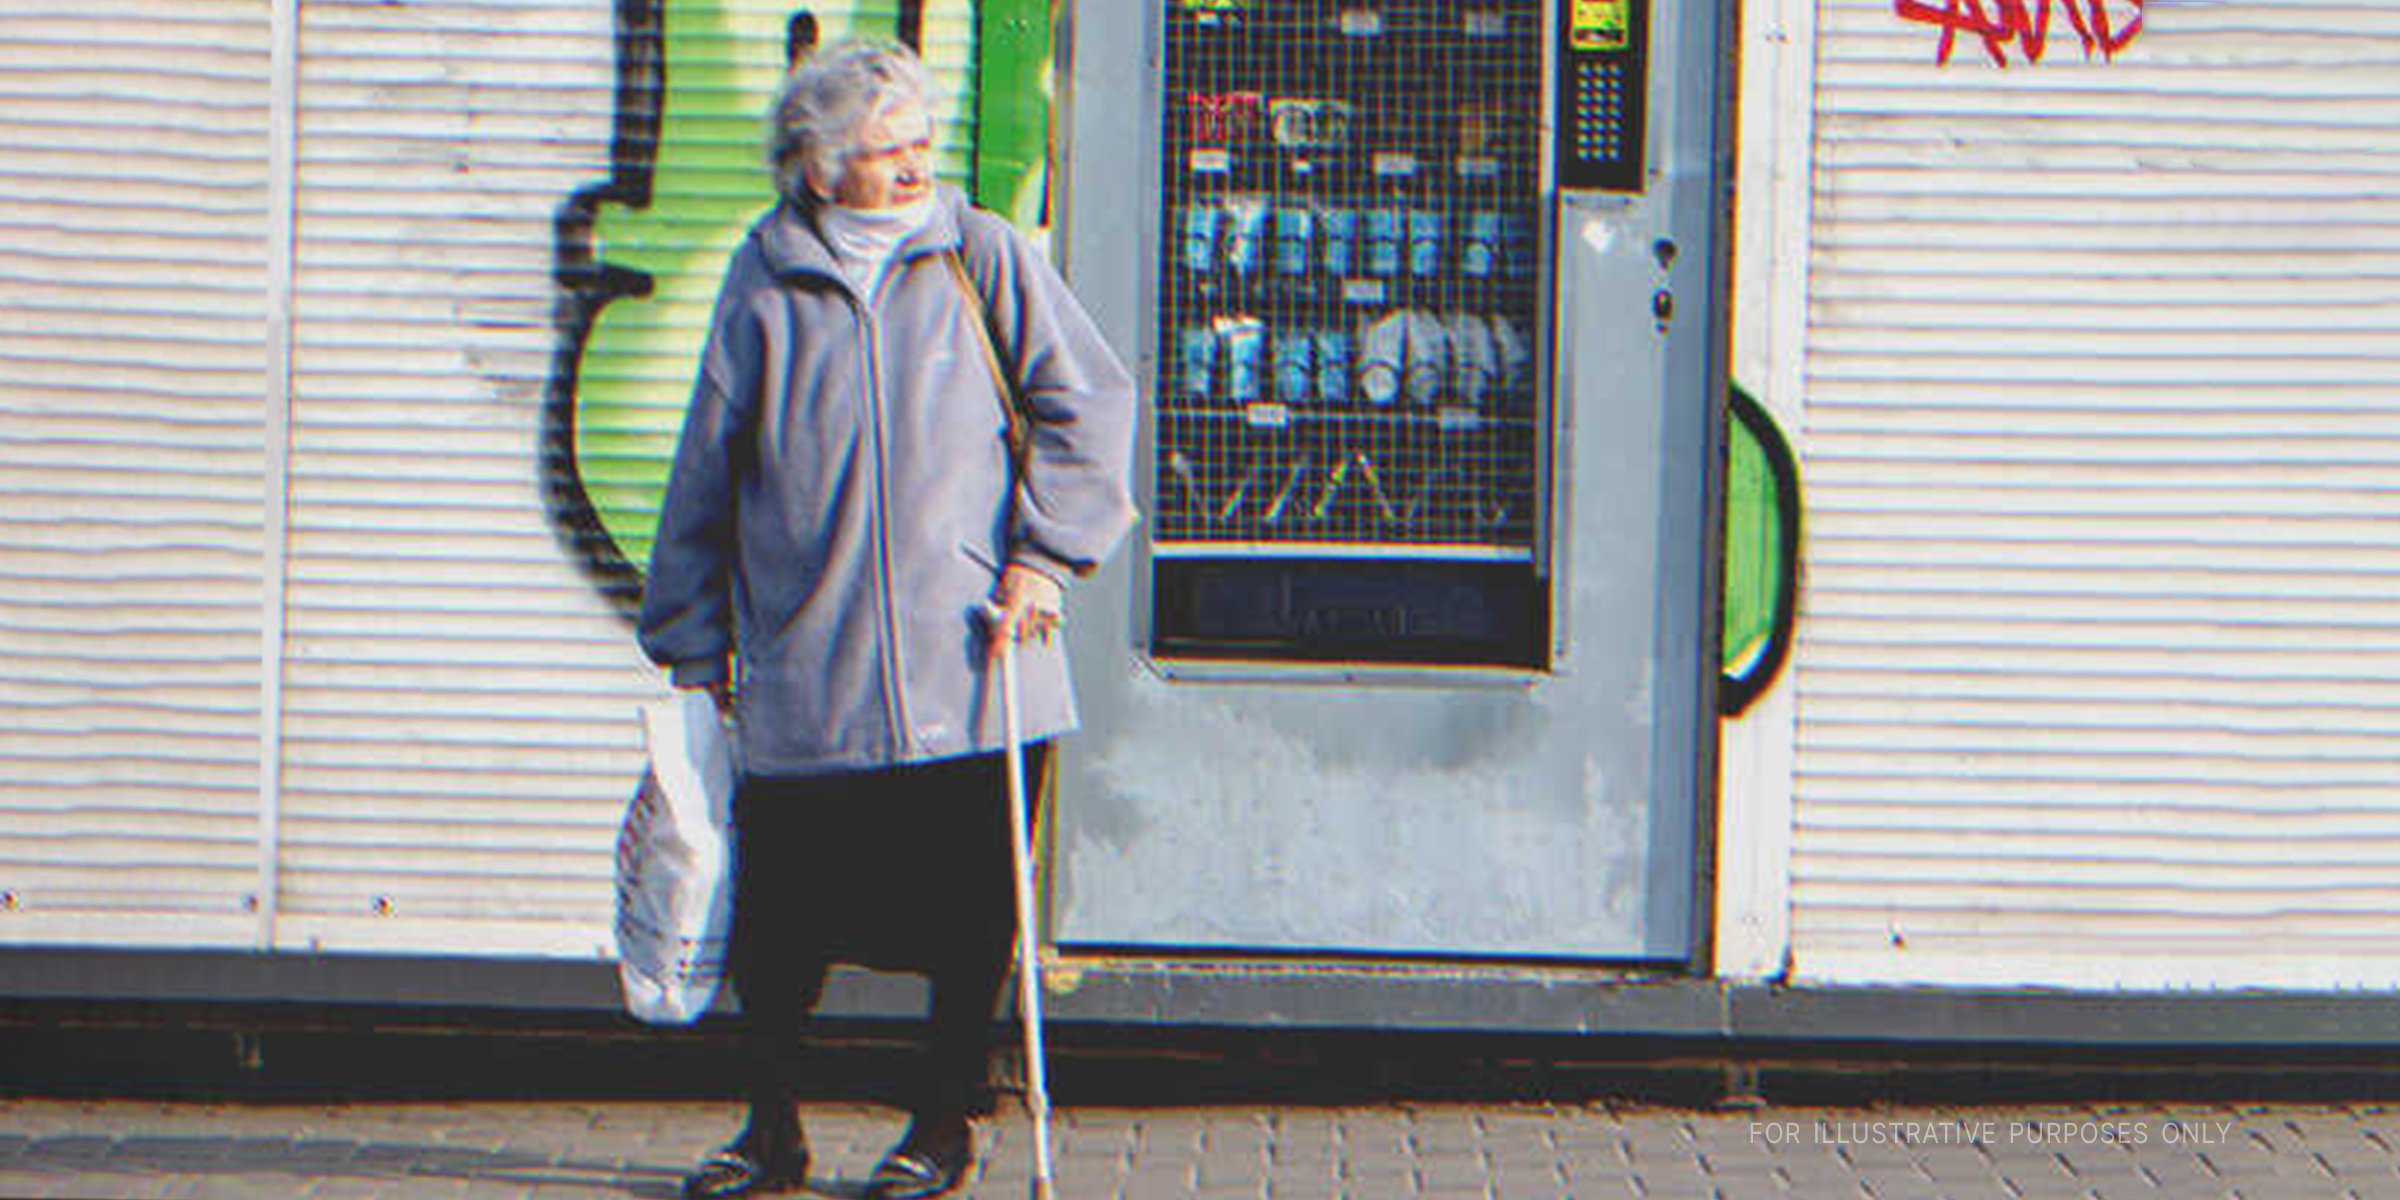 Old woman on the street. | Source: Shutterstock